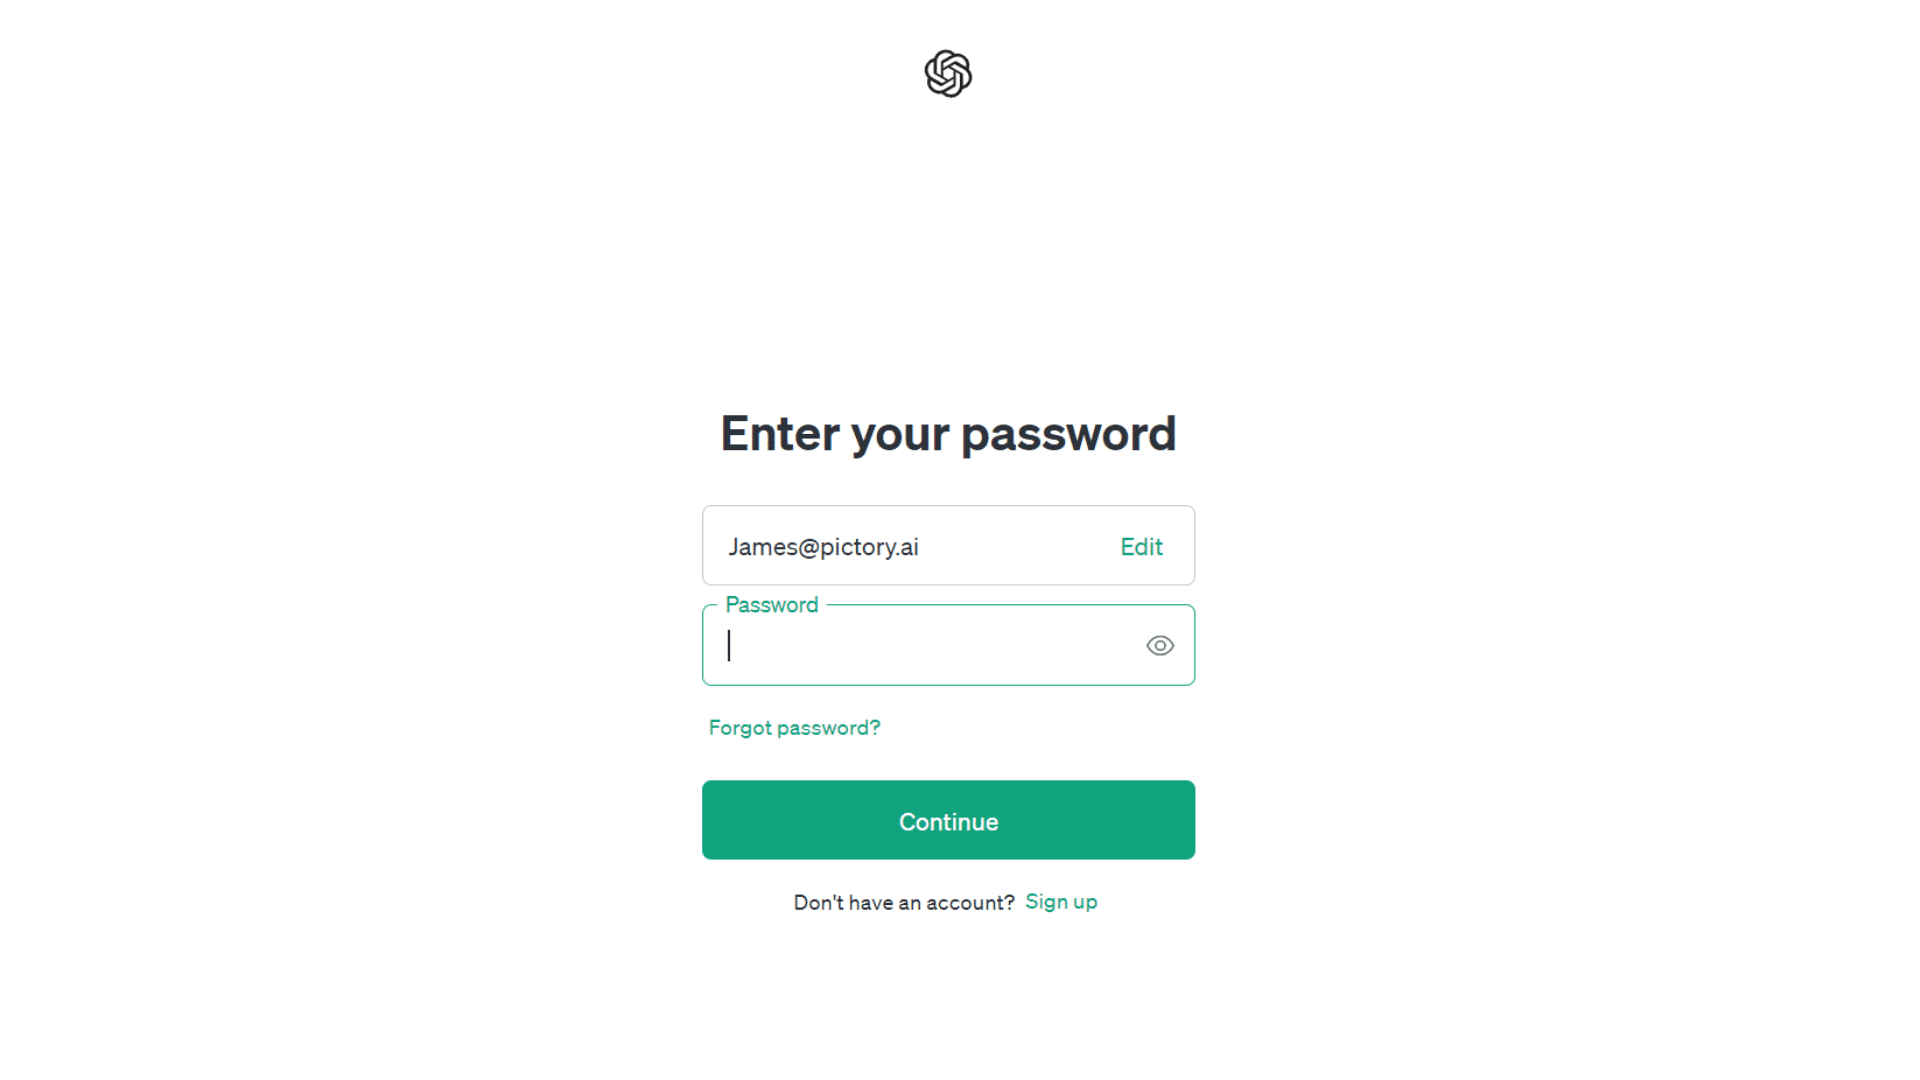 Enter your email adress and password